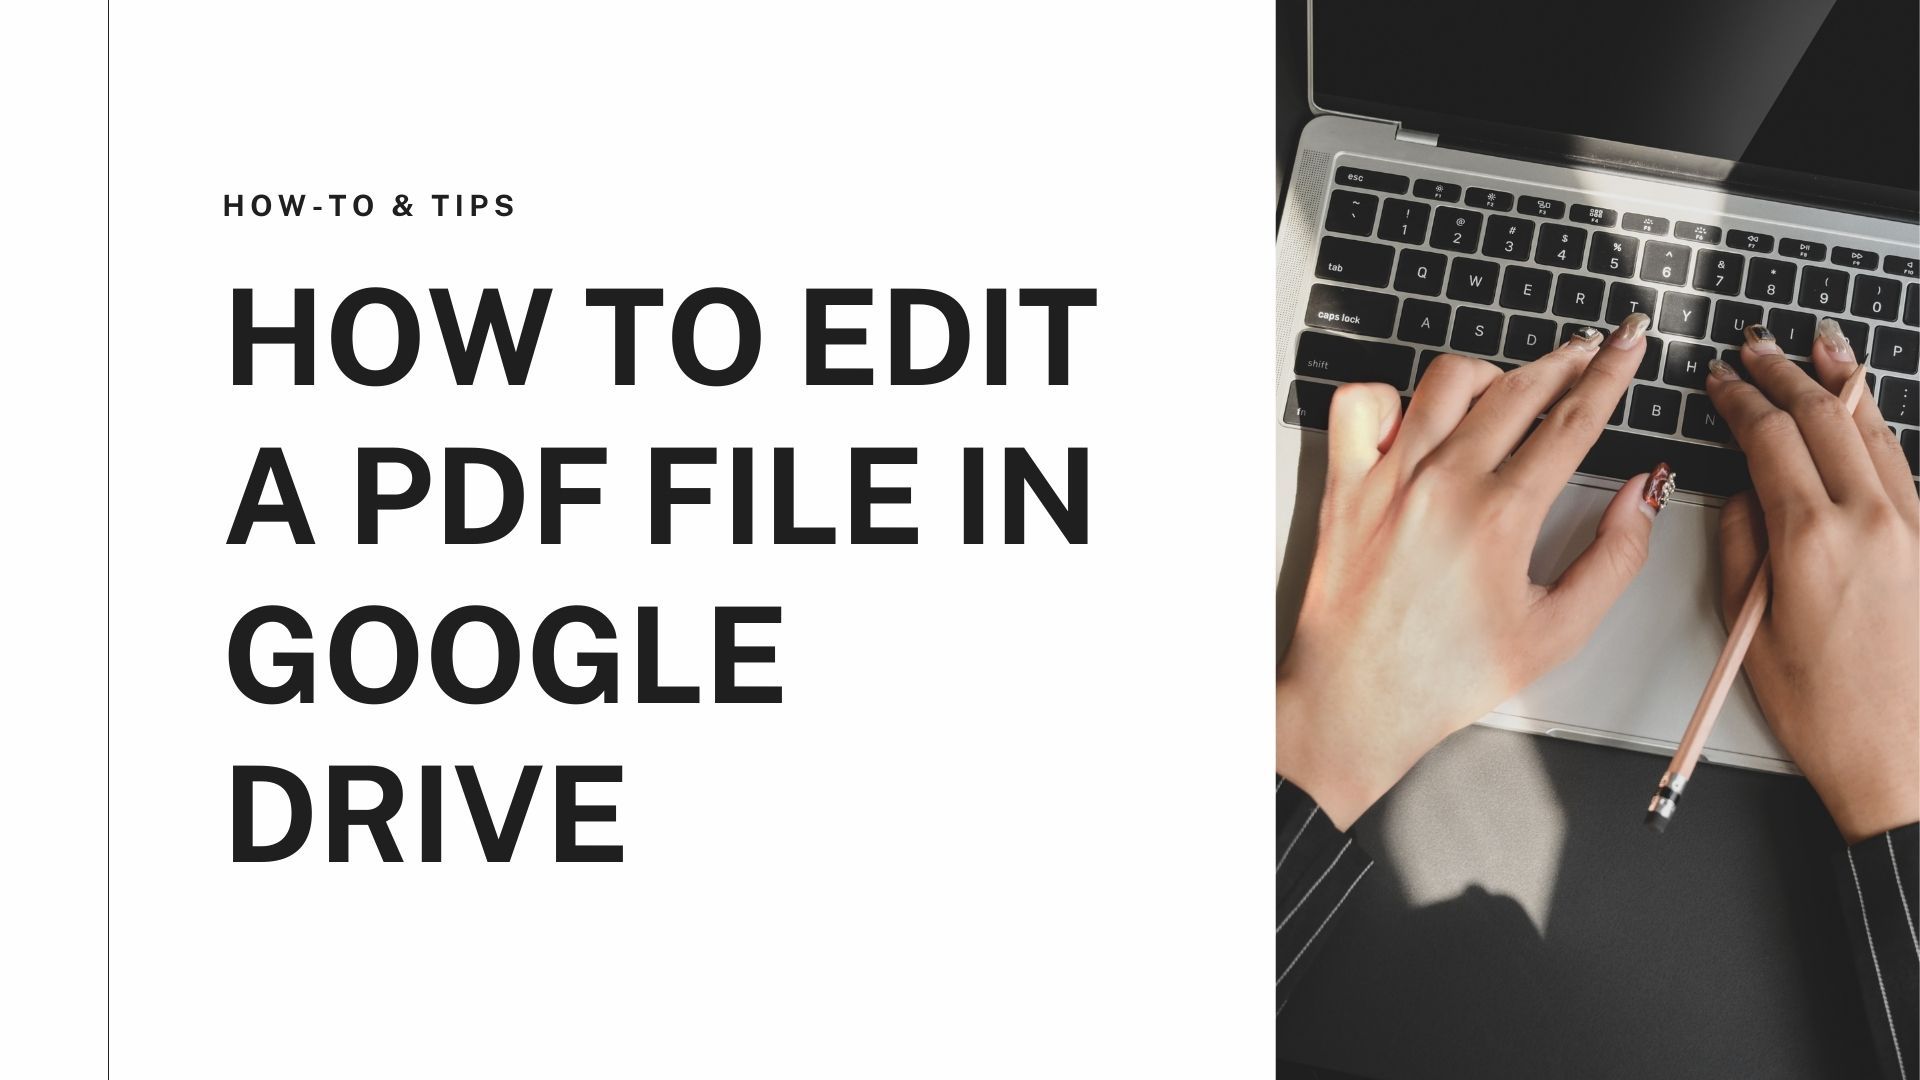 How to edit a PDF file in Google Drive.jpg